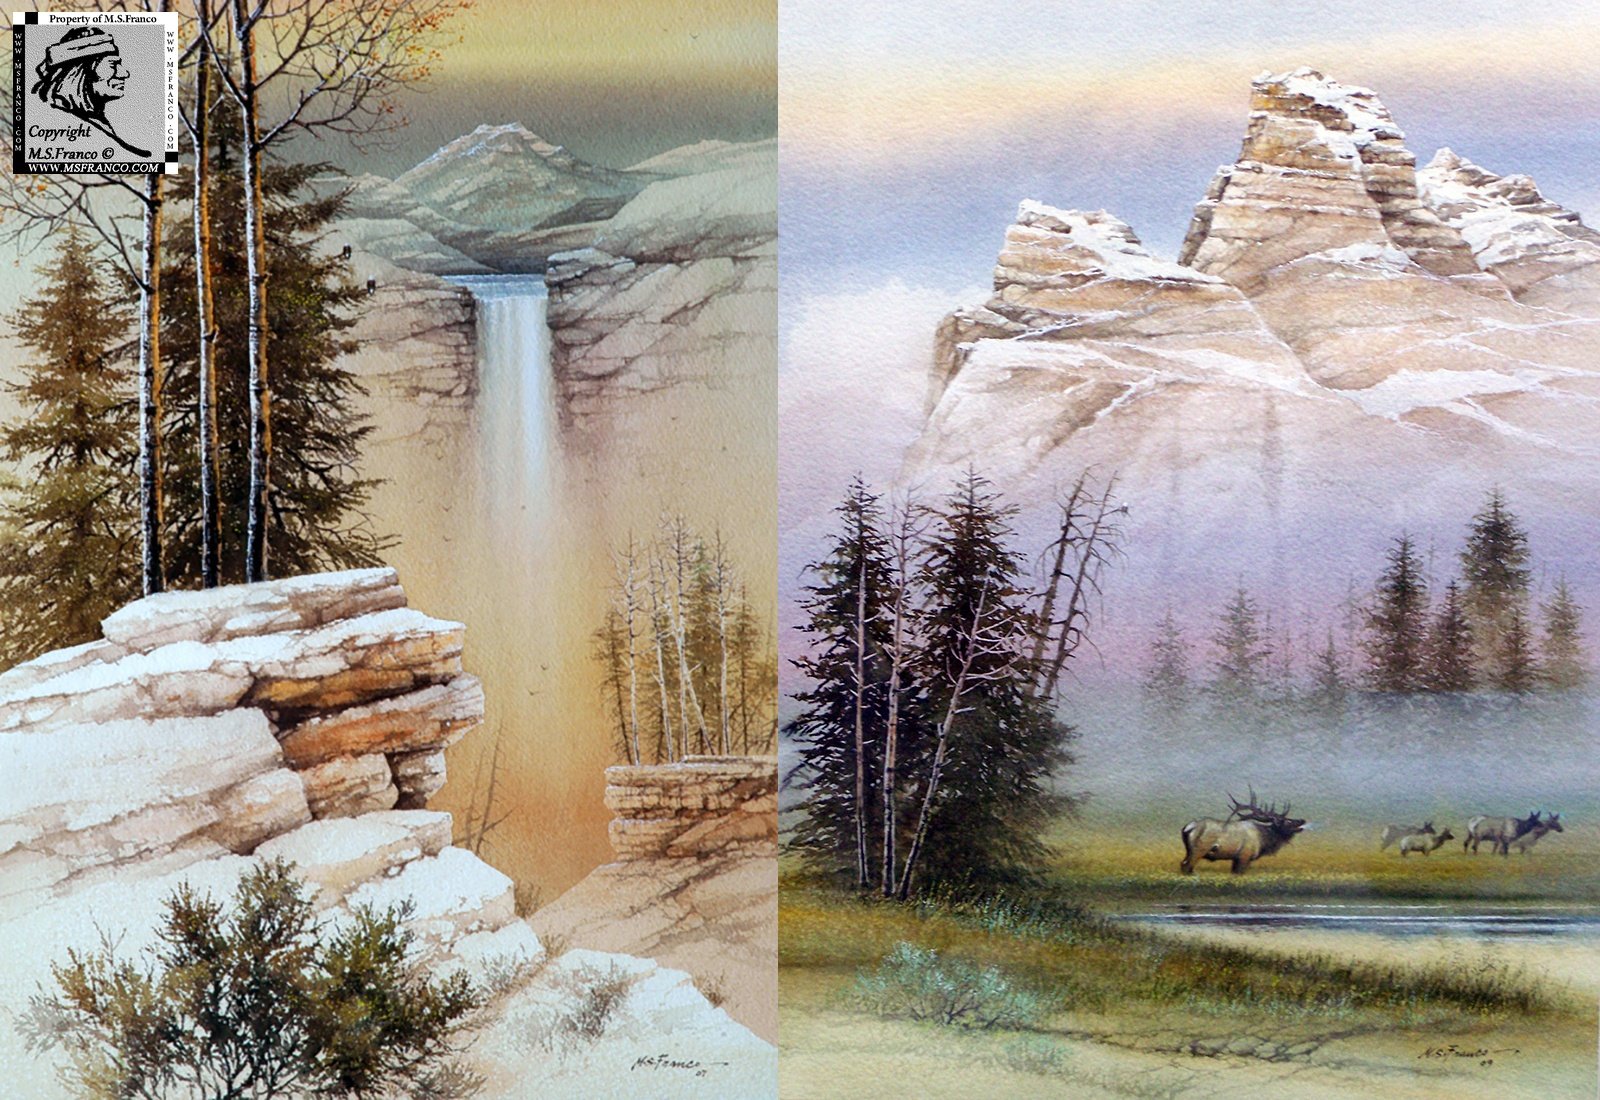 "The Great Cascade"  
 and 
"Up in the High country"